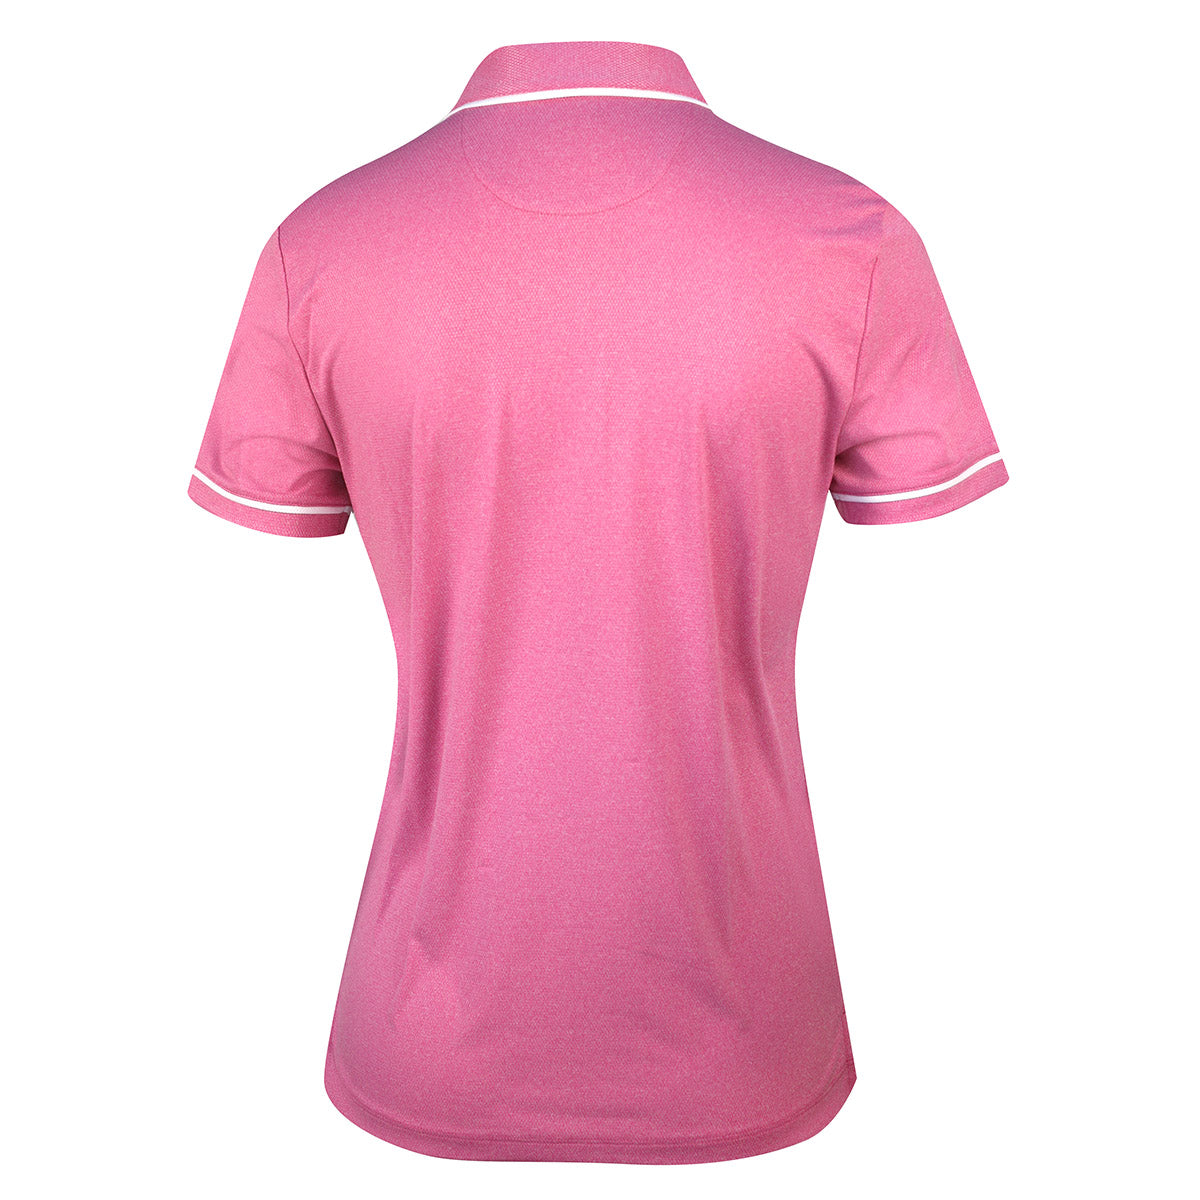 Original Penguin Ladies Piped Short Sleeve Polo in Fuschsia Red